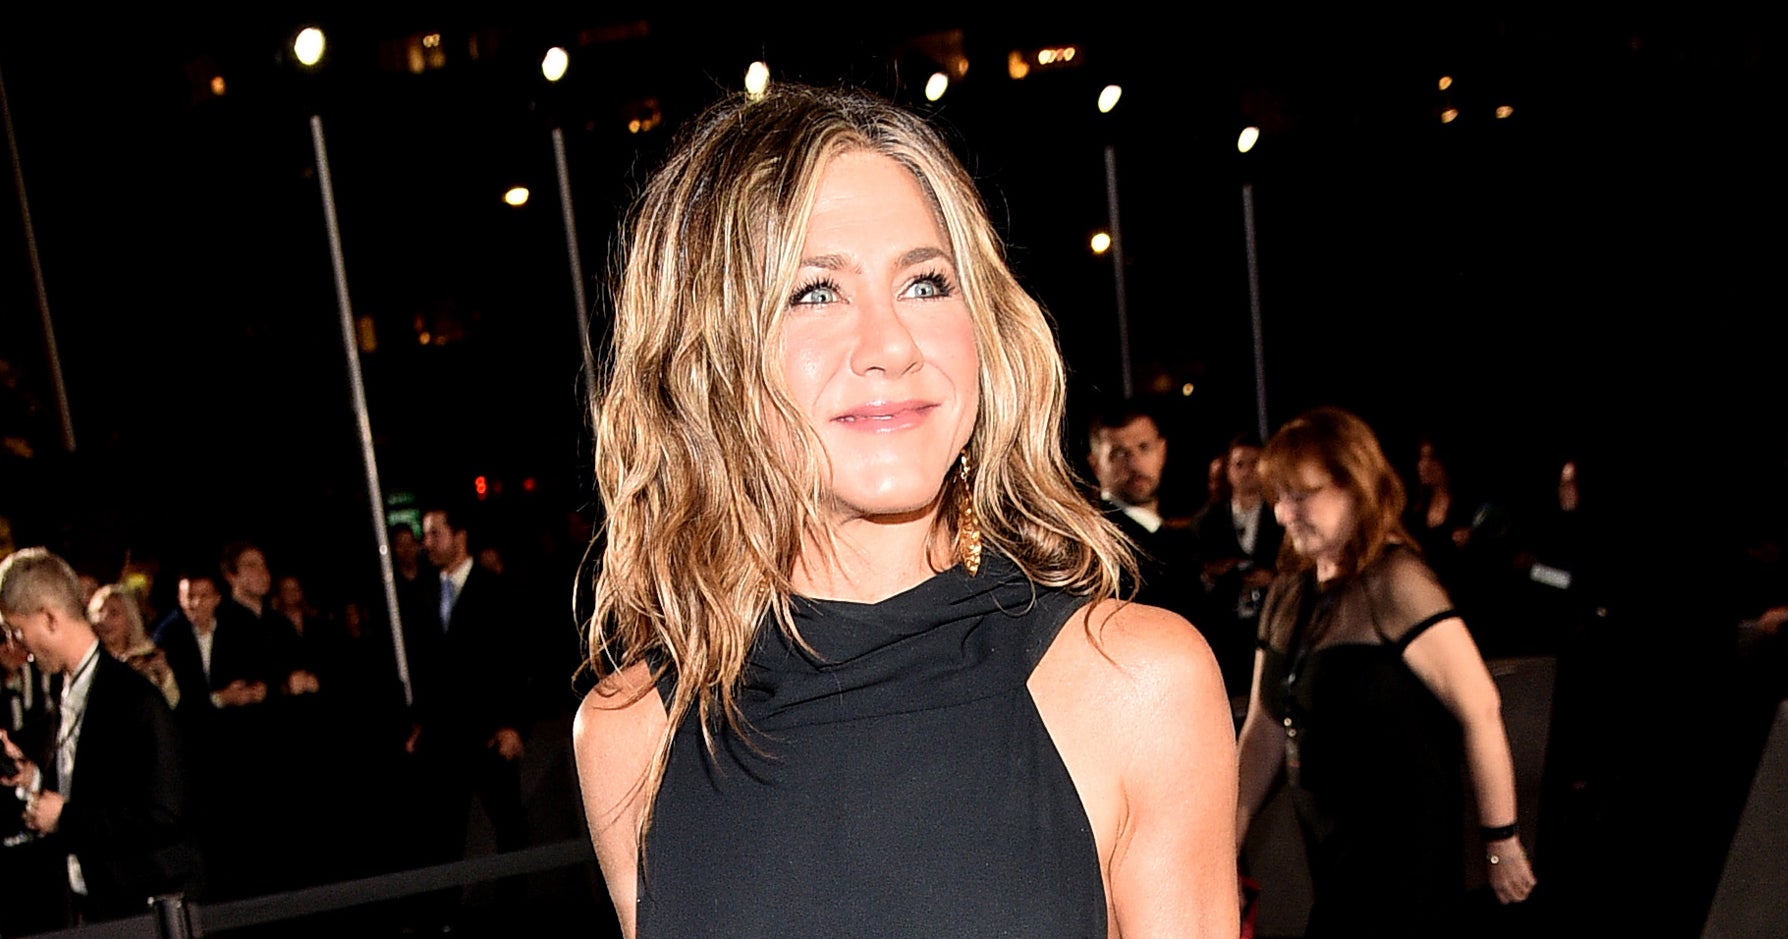 Jennifer Aniston reveals who keeps her company at night